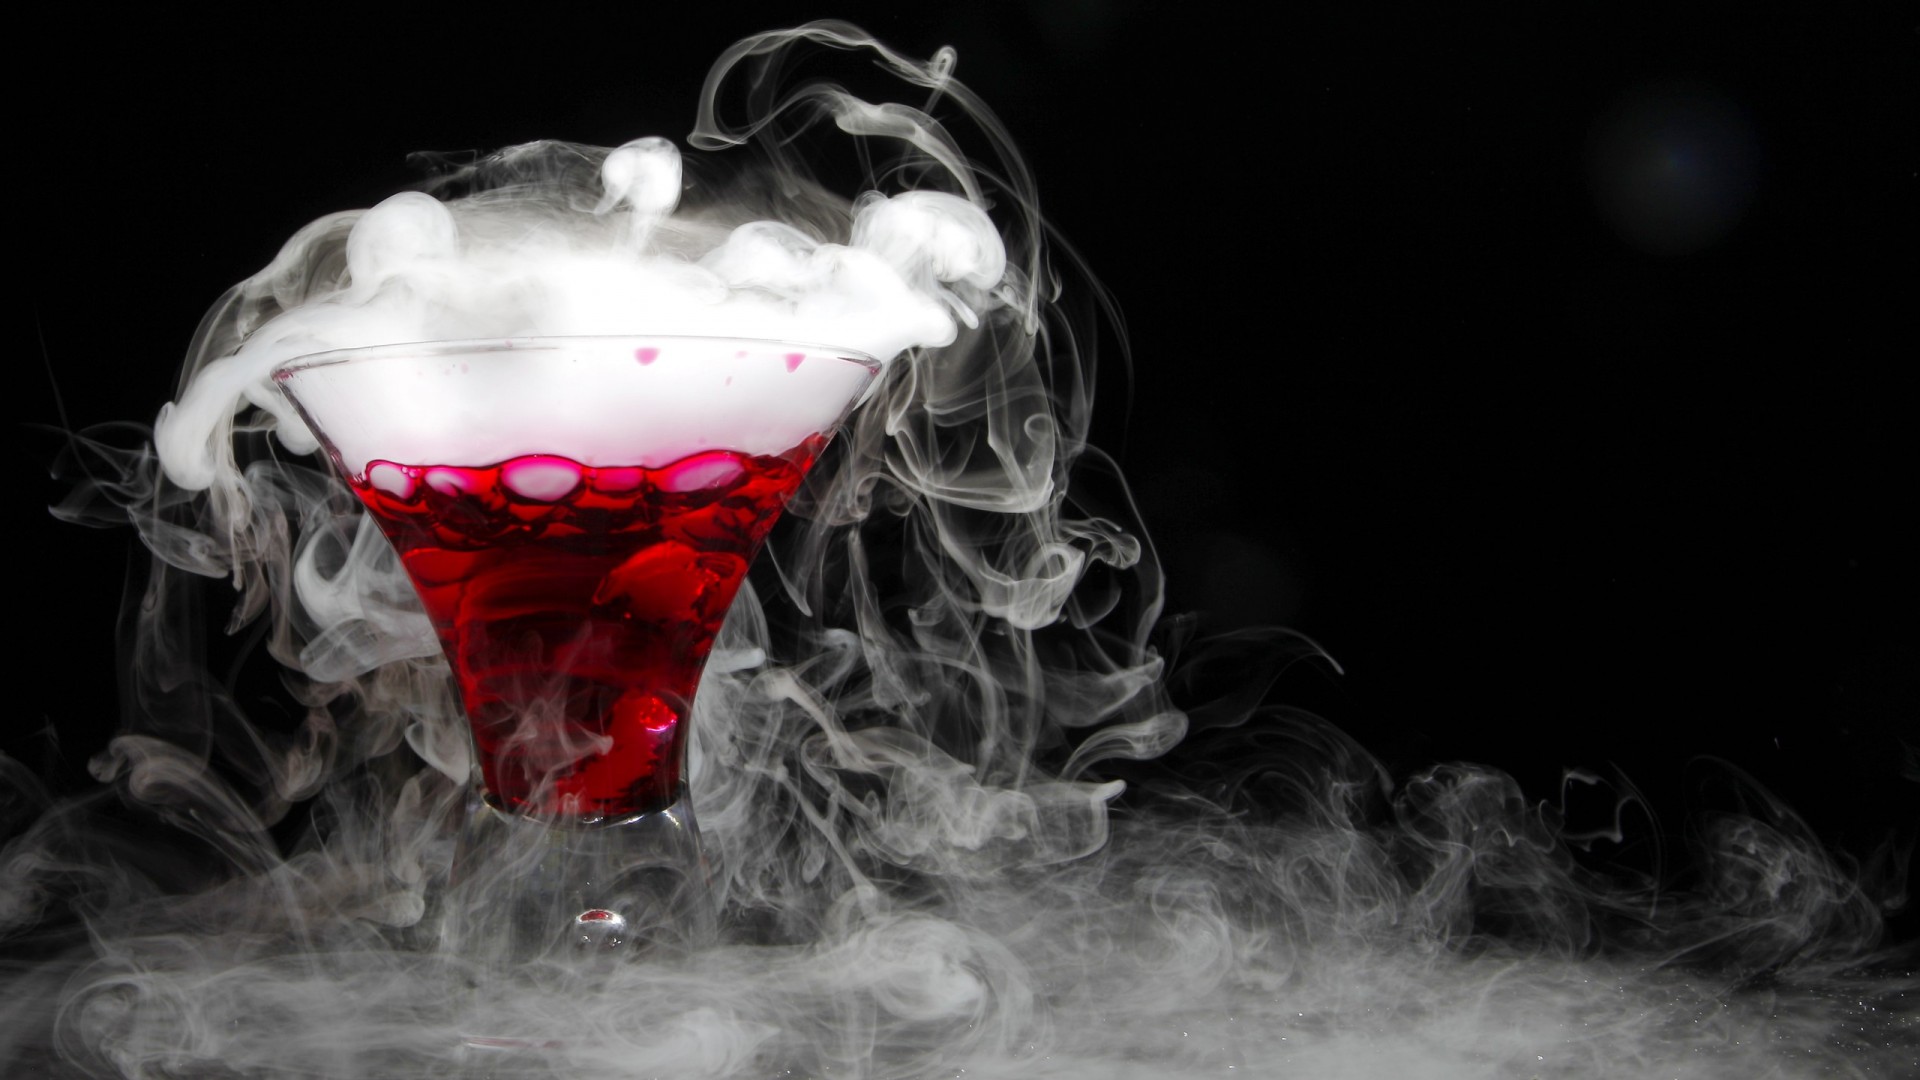 Cocktail Dry Ice Full Hd Wallpaper for Desktop and Mobiles